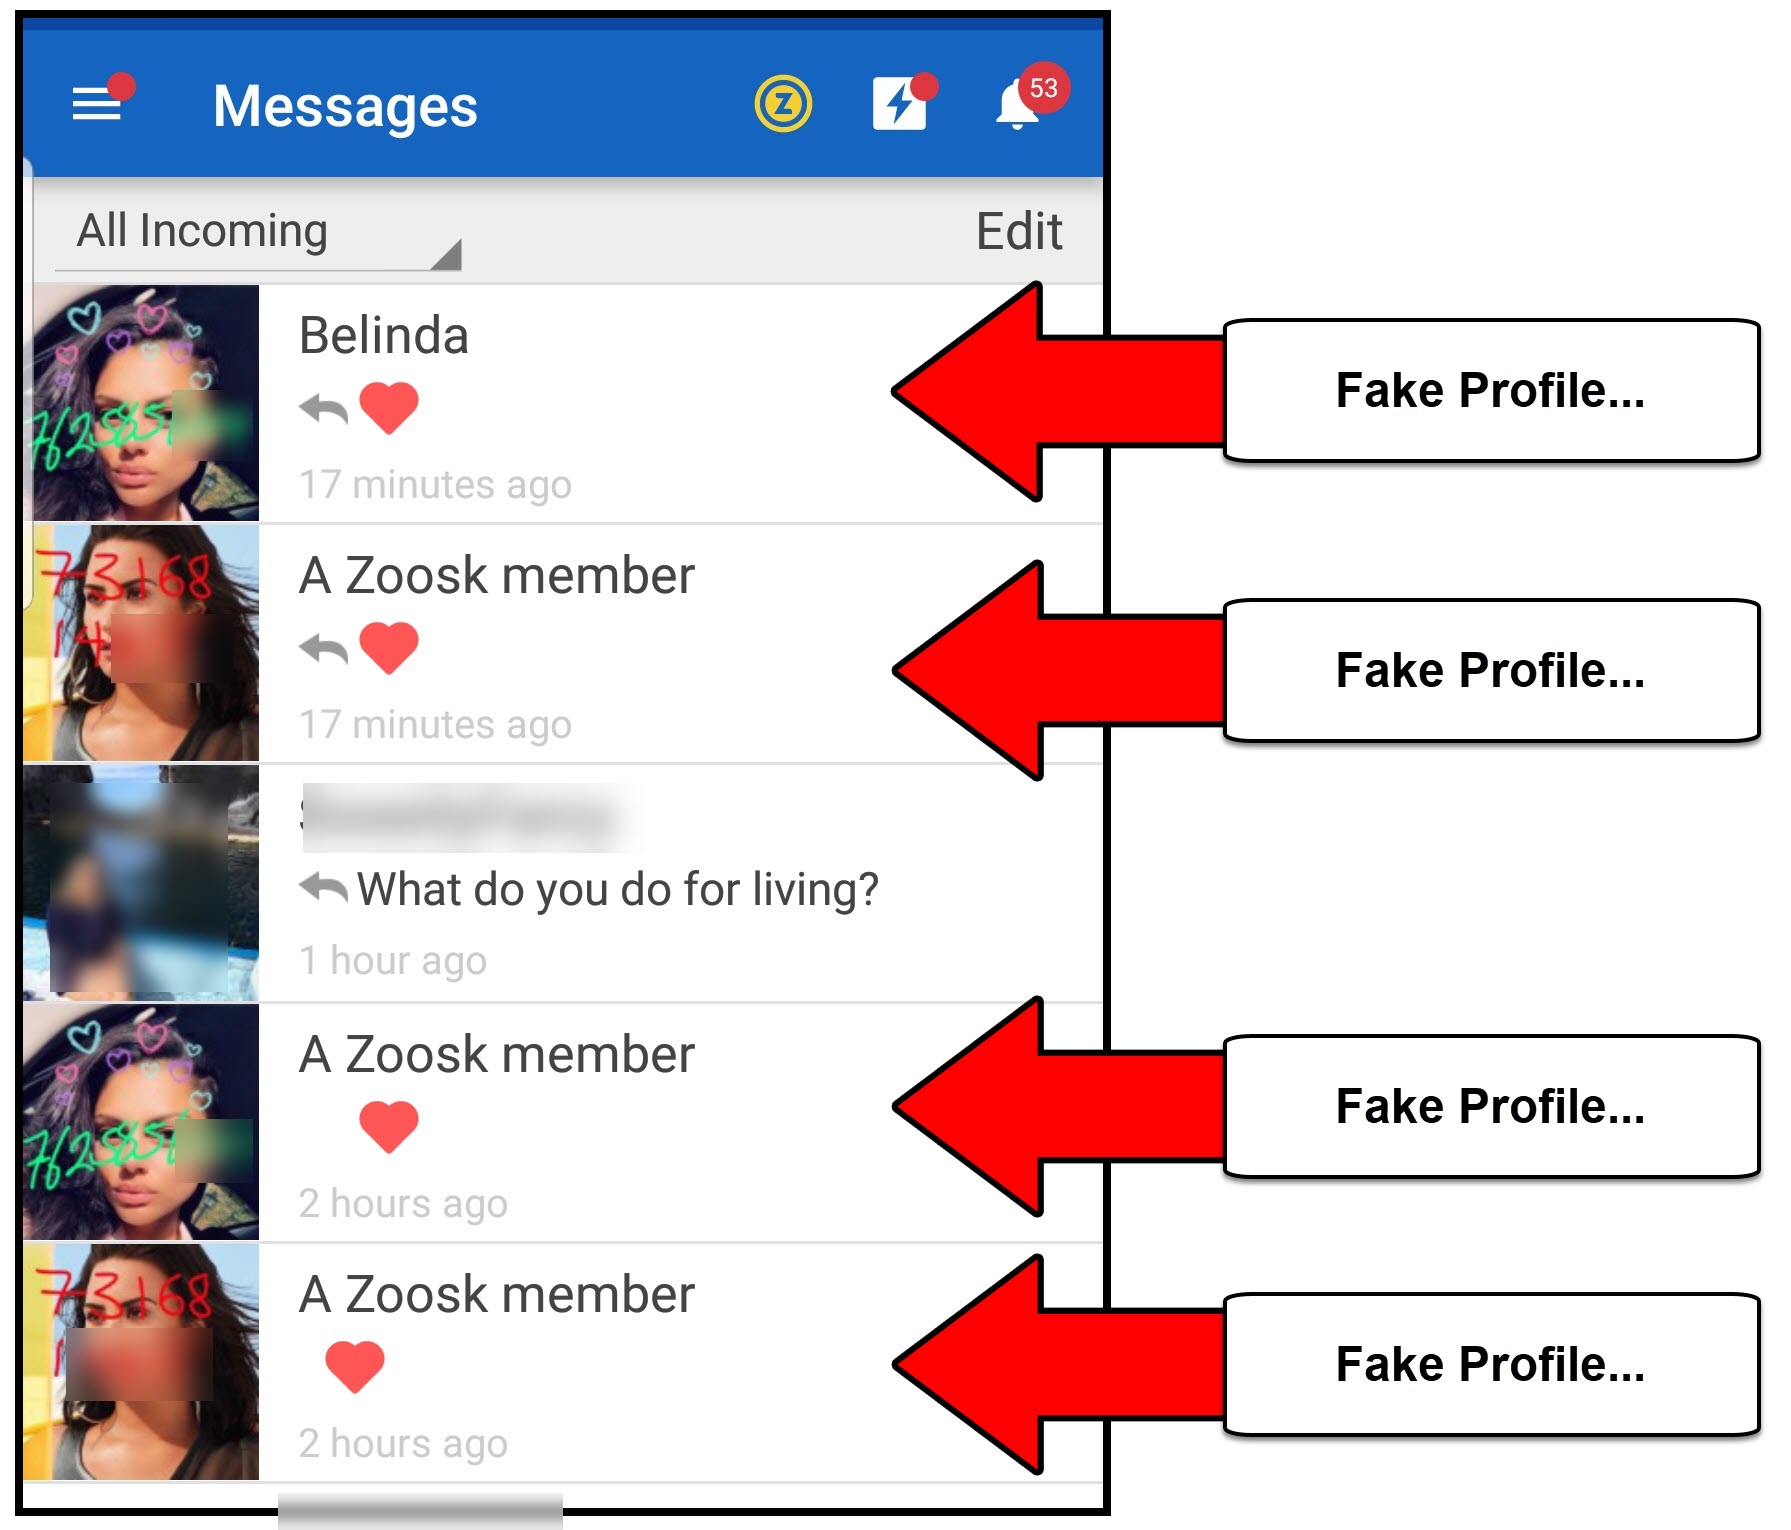 Fake profile examples on Zoosk.